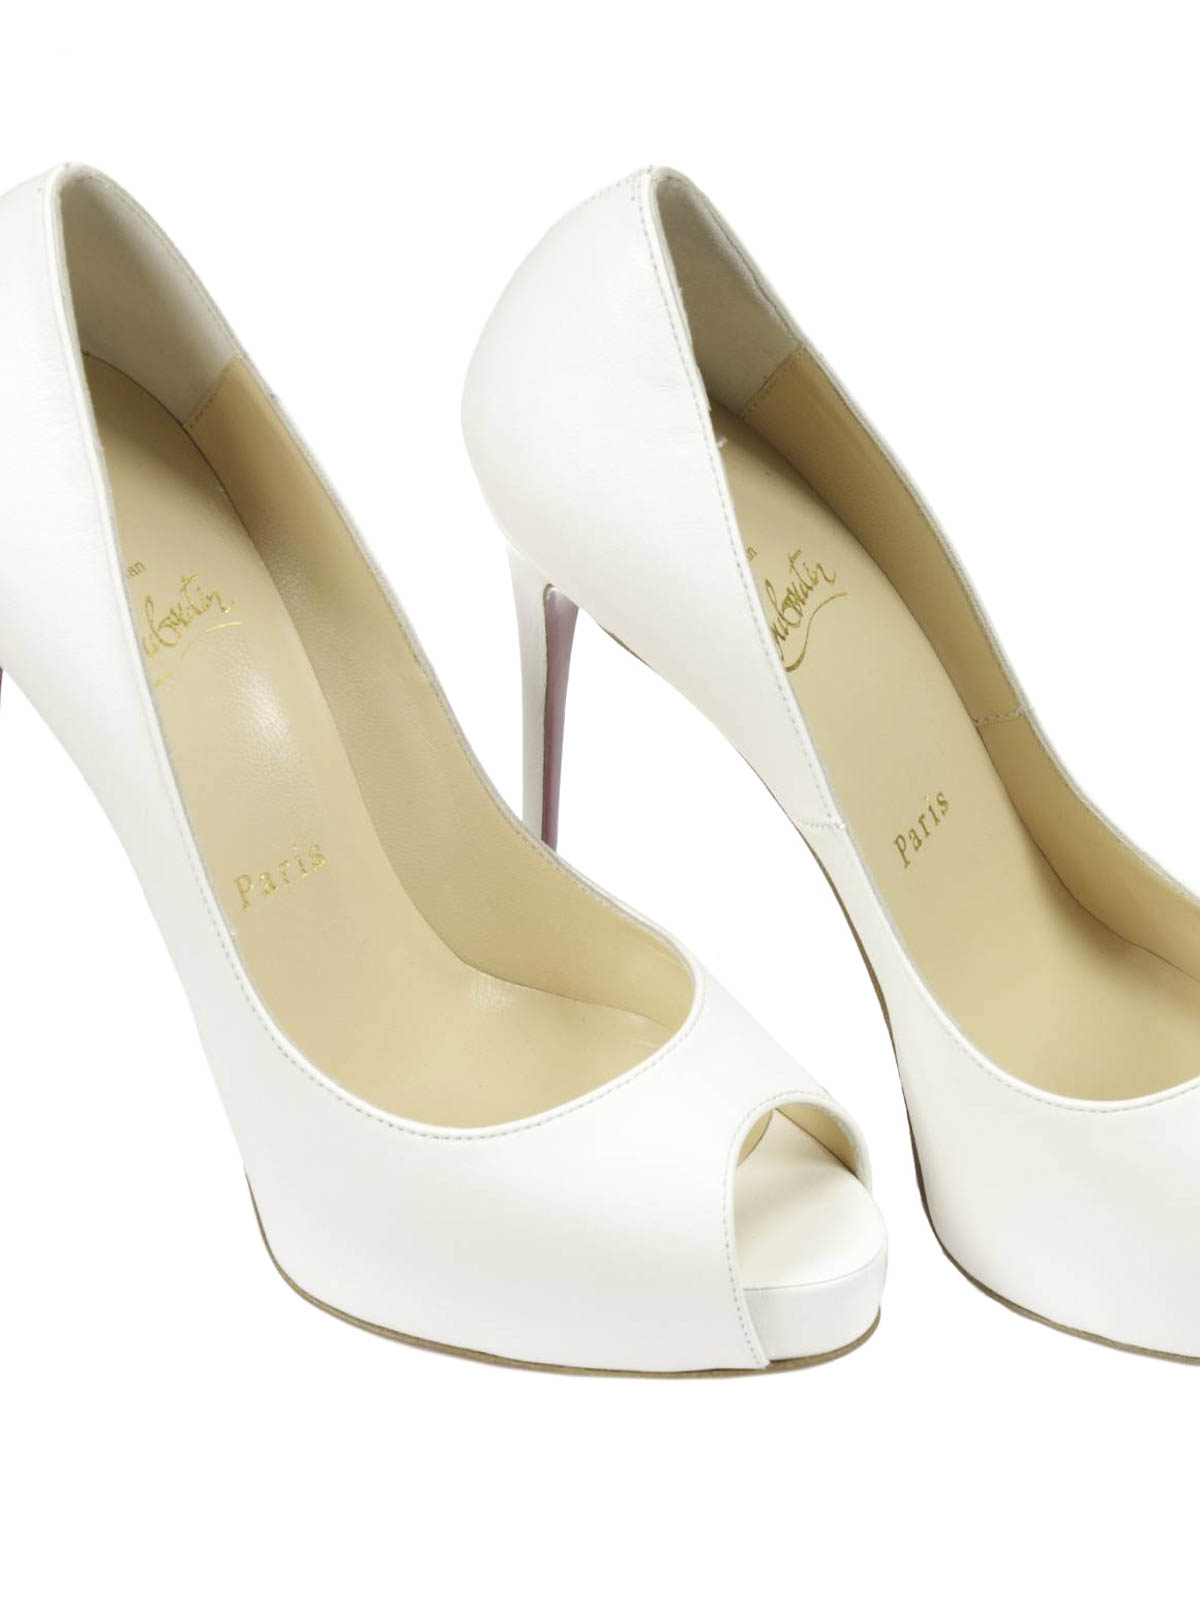 New Very Prive pumps by Christian Louboutin - court shoes | iKRIX  